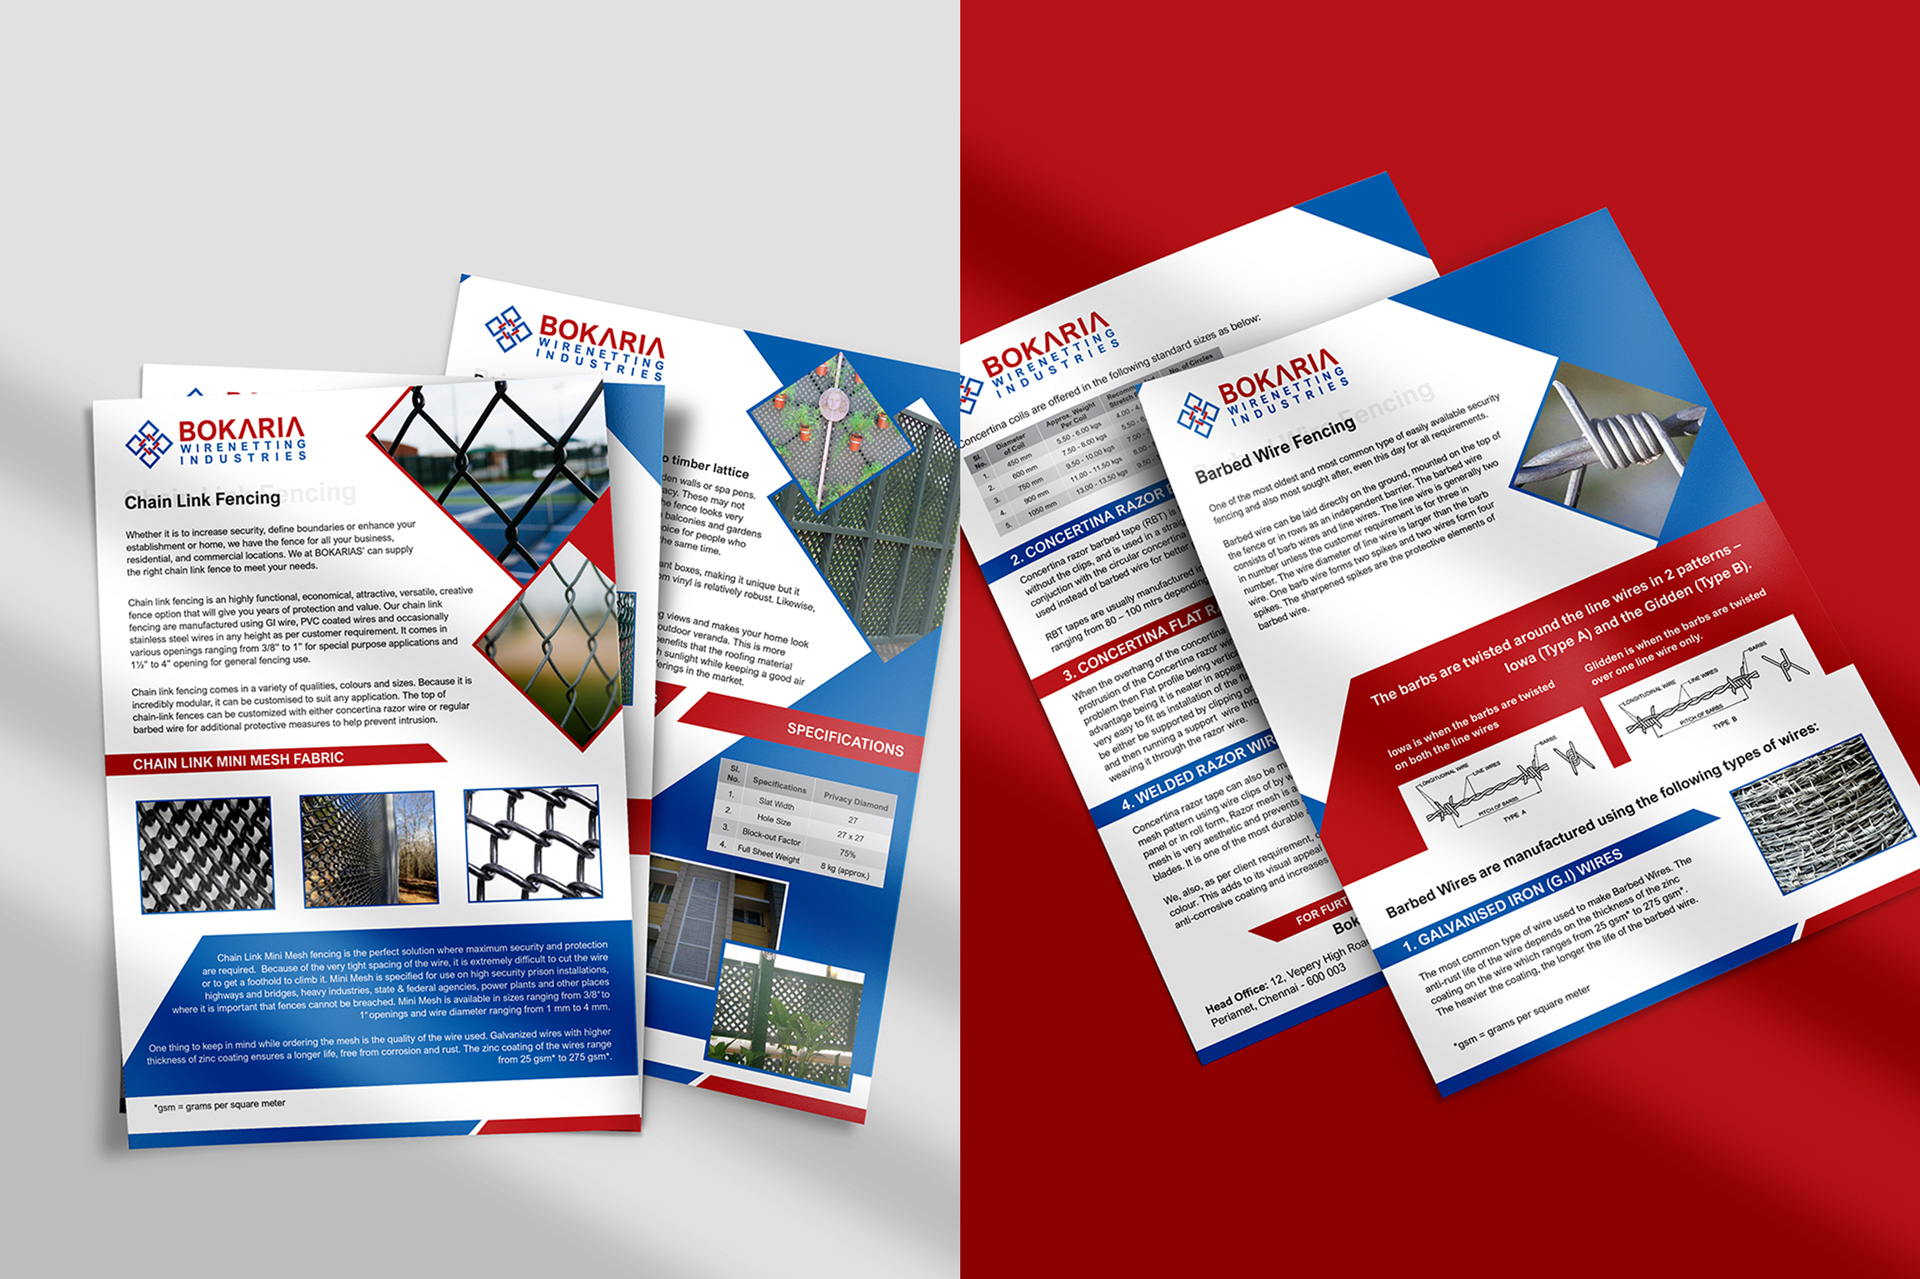 brand-marketing-collateral-brochure-flyer-pamphlet-design-industrial-manufacturing-company-chennai-bokaria-wirenetting-reinaphics-chennai